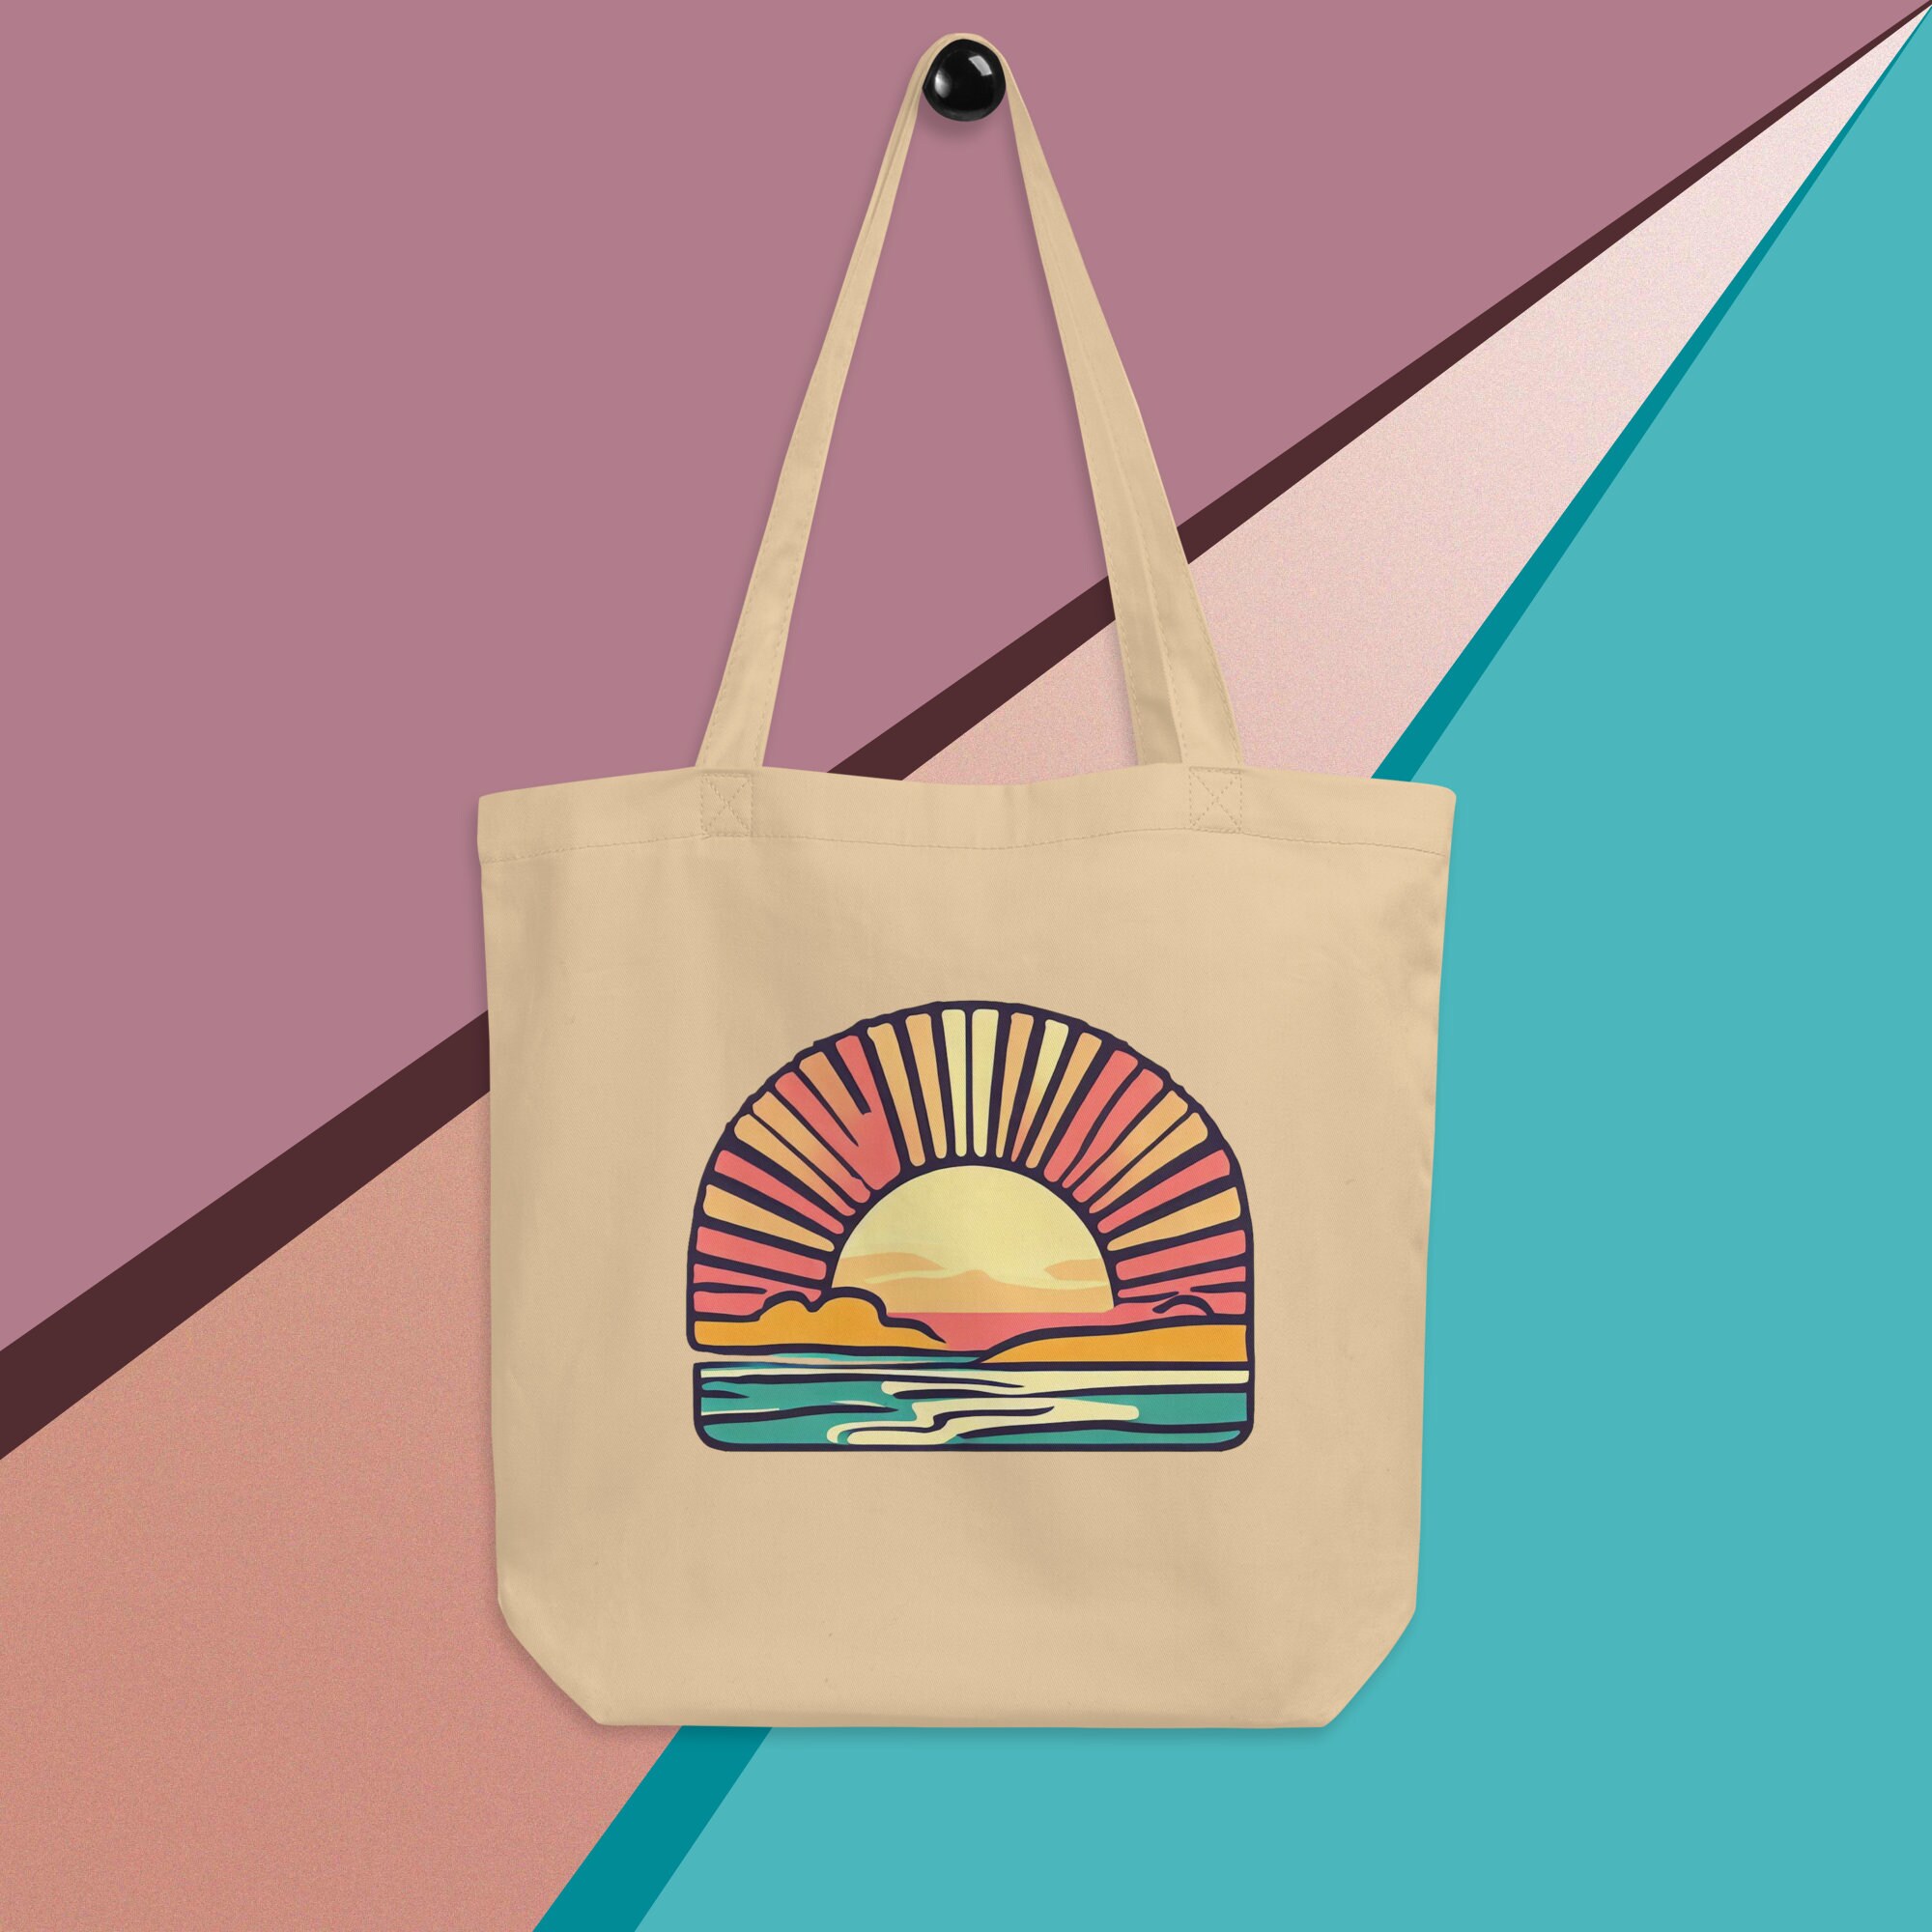 Forever Chasing Sunsets Tote Bag, Beach Bag, Trendy Canvas Tote, Aesthetic,  Wavy Words, Design Your Own Cotton Tote Bag